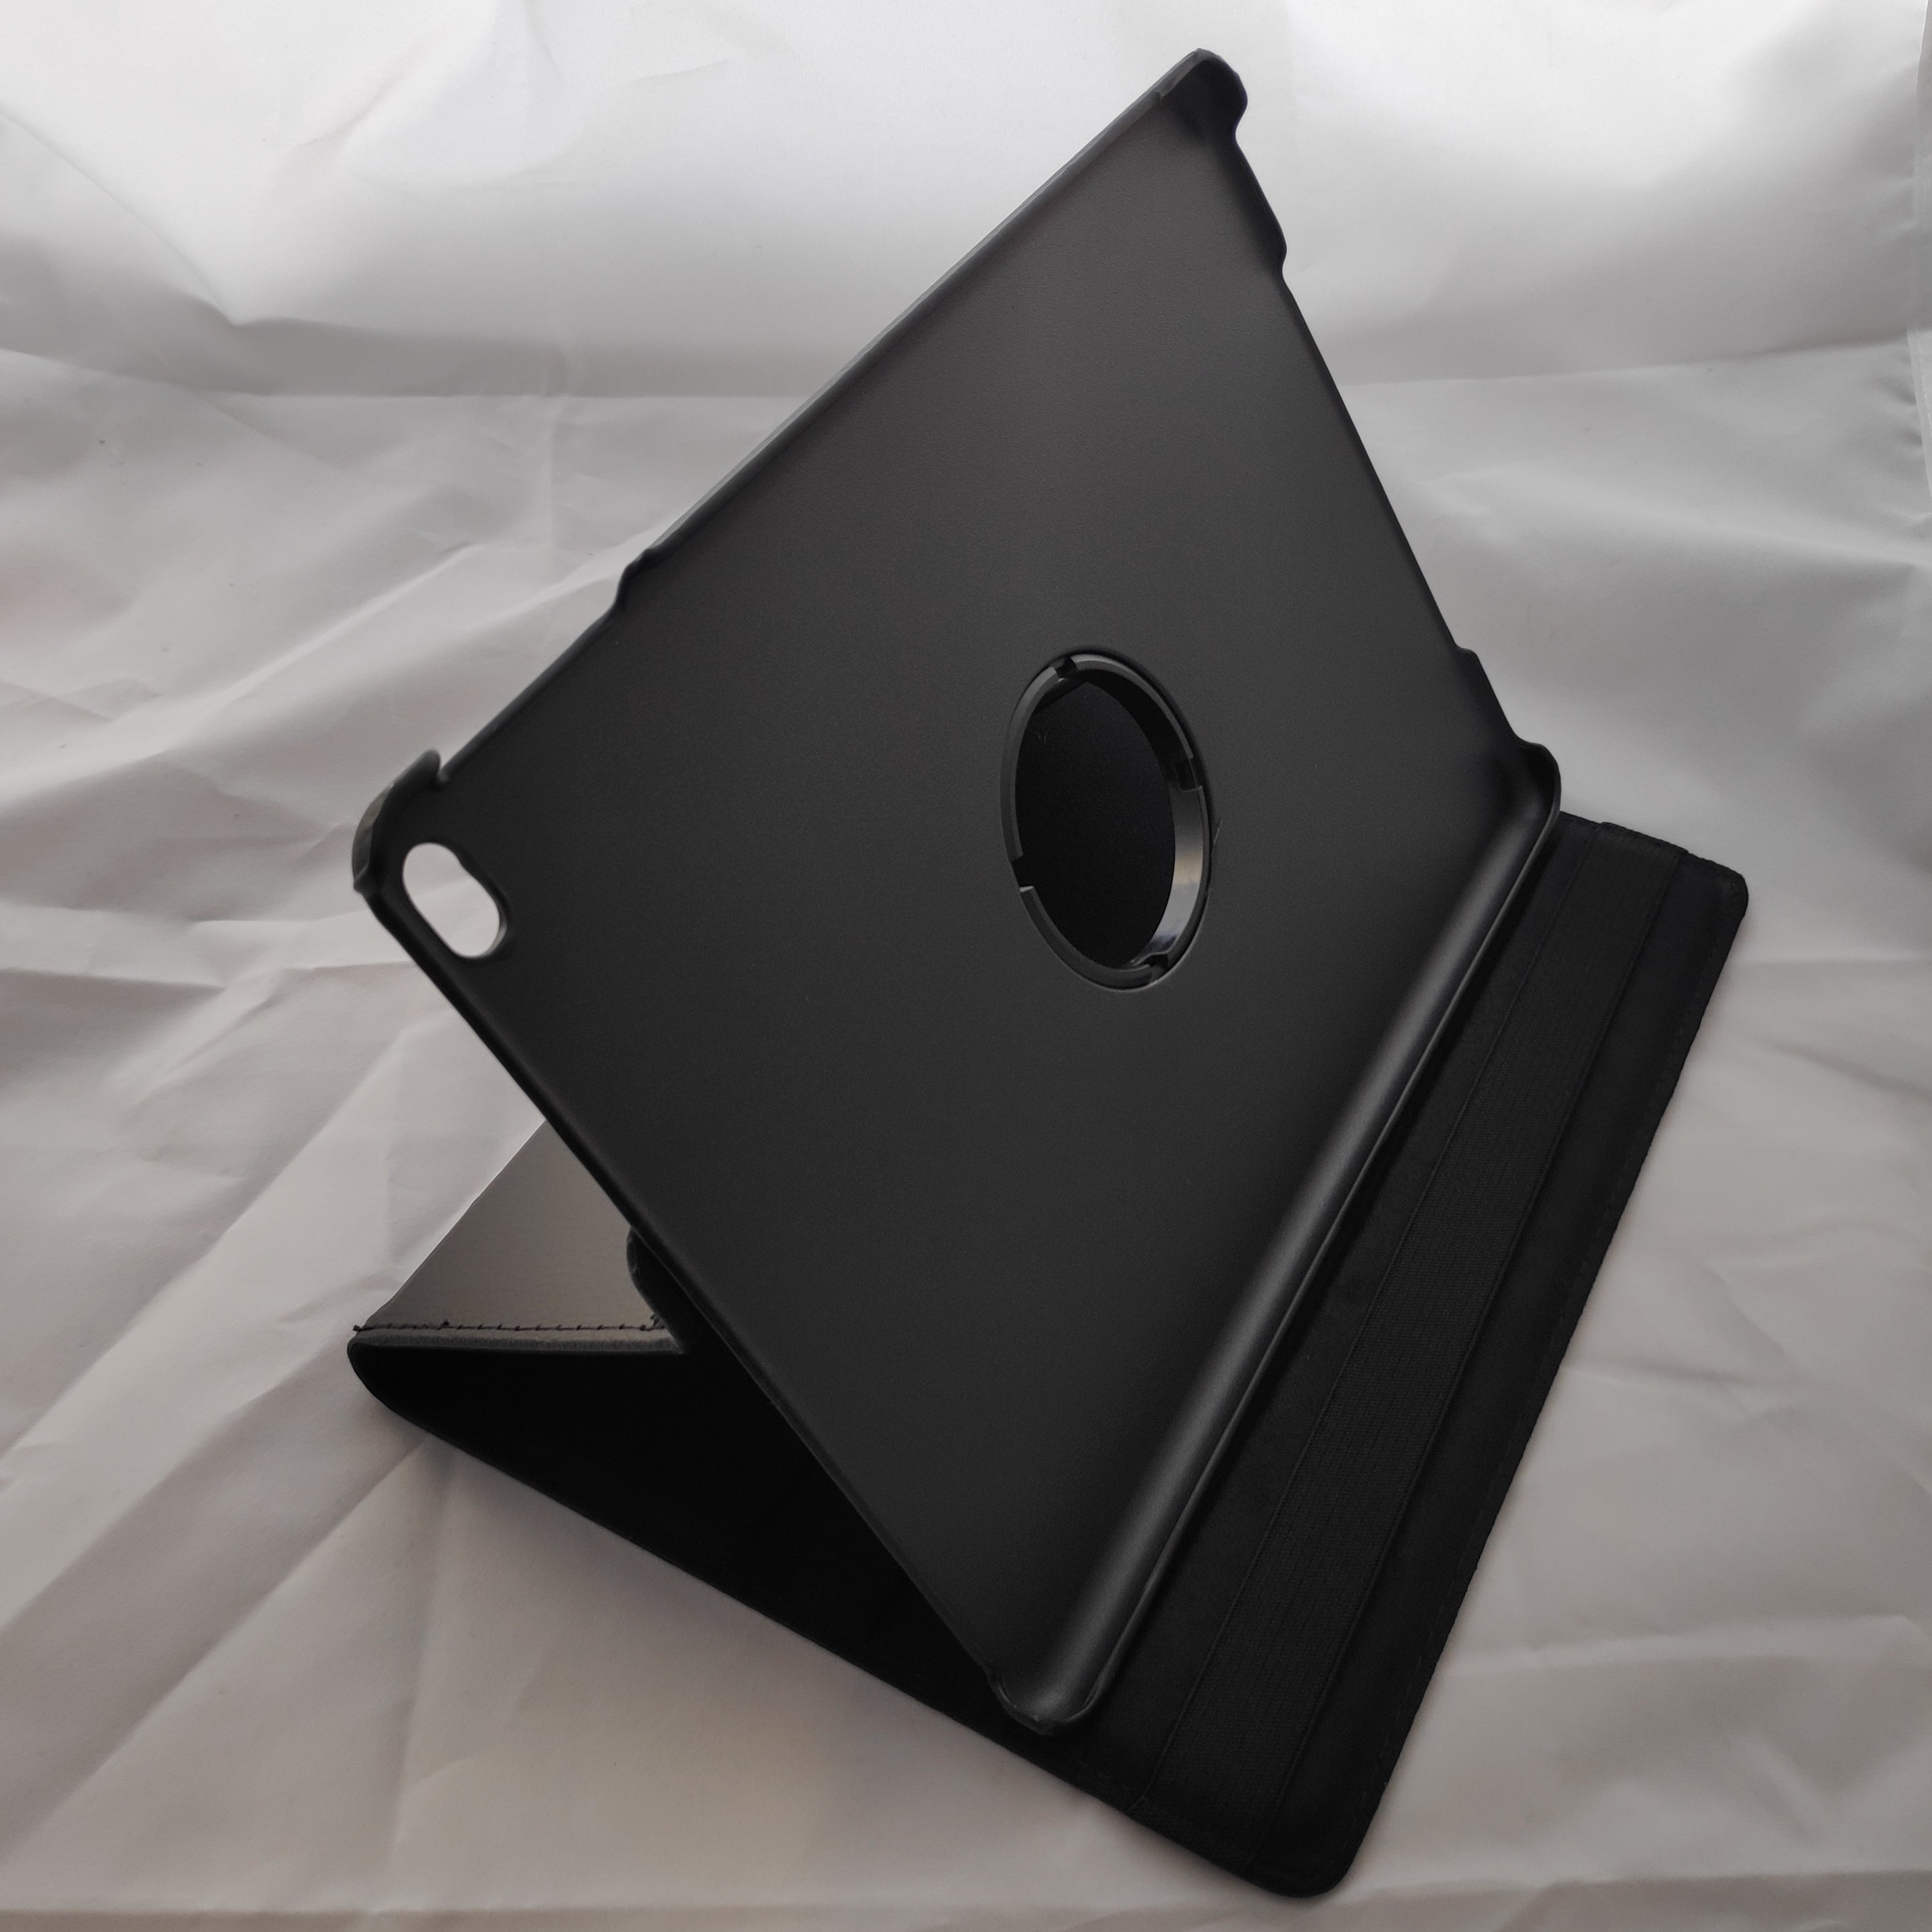 Kickstand Book Case for iPad Pro 12.9 - Black *Free Shipping*